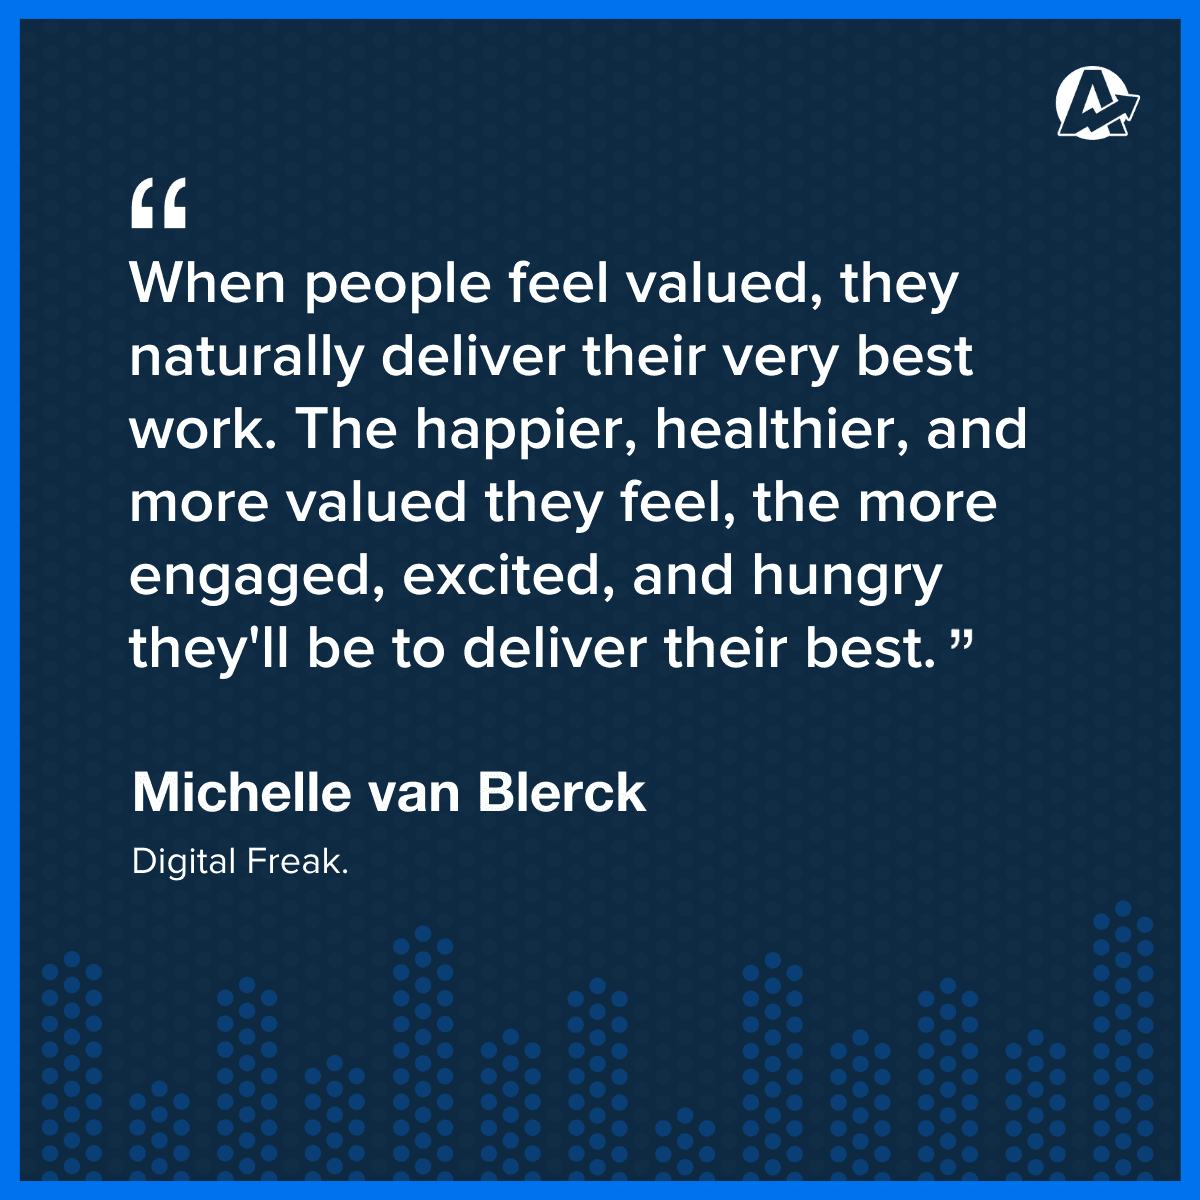 Quote from Michelle Van Blerck on Conscious Agency Leadership